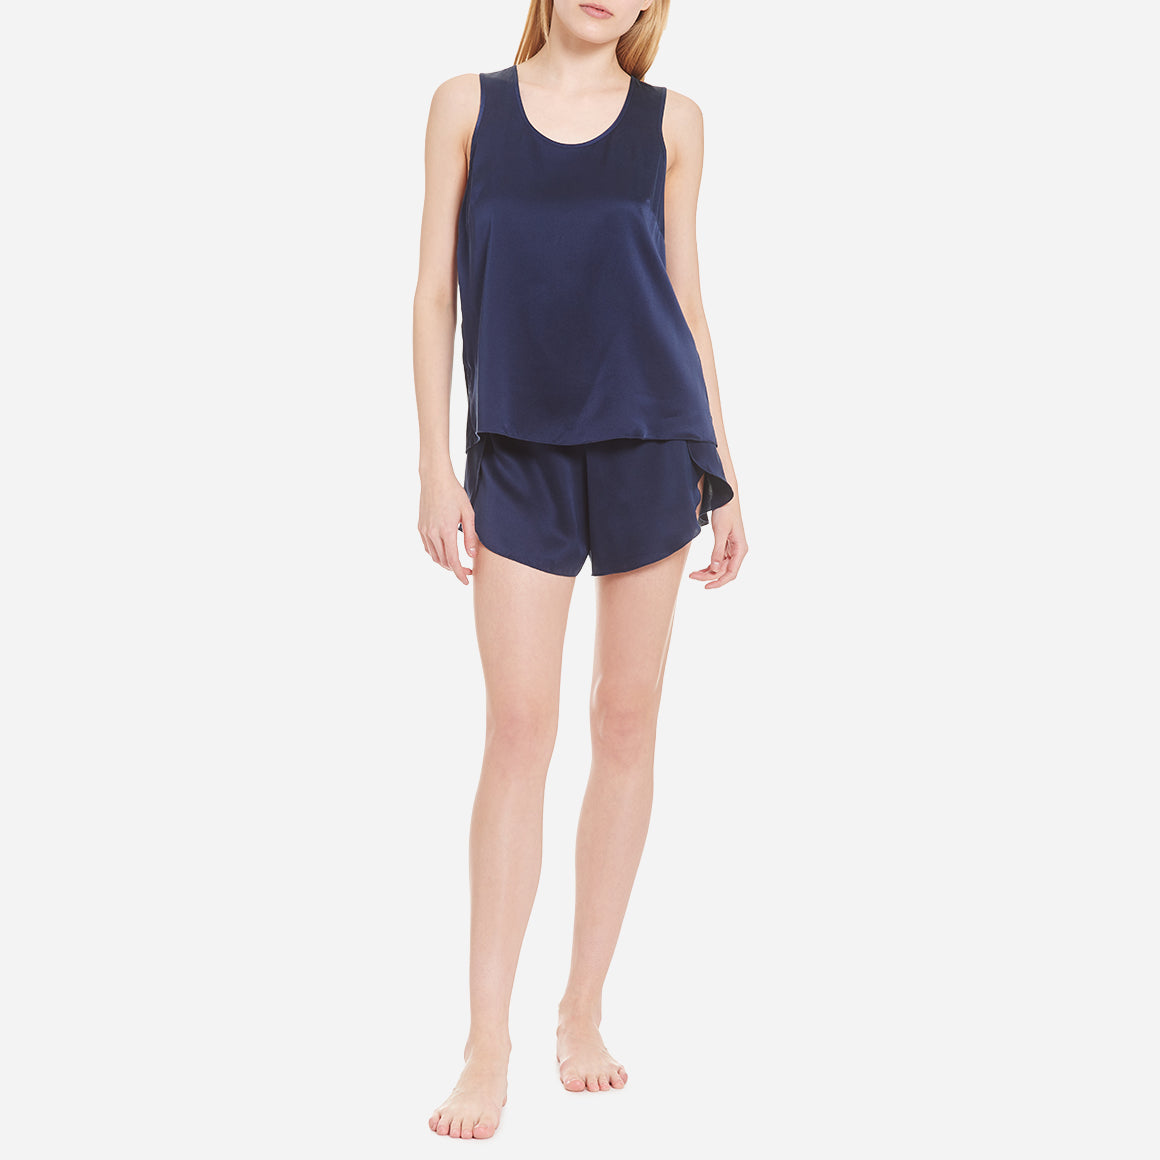 The set includes a sleeveless tee and relaxed-fit shorts, both crafted from breathable silk fabric that is lightweight, comfortable, and machine washable. The shorts feature an elastic waistband for a perfect fit, while the top is designed with a flattering neckline and relaxed fit that drapes beautifully on the body.